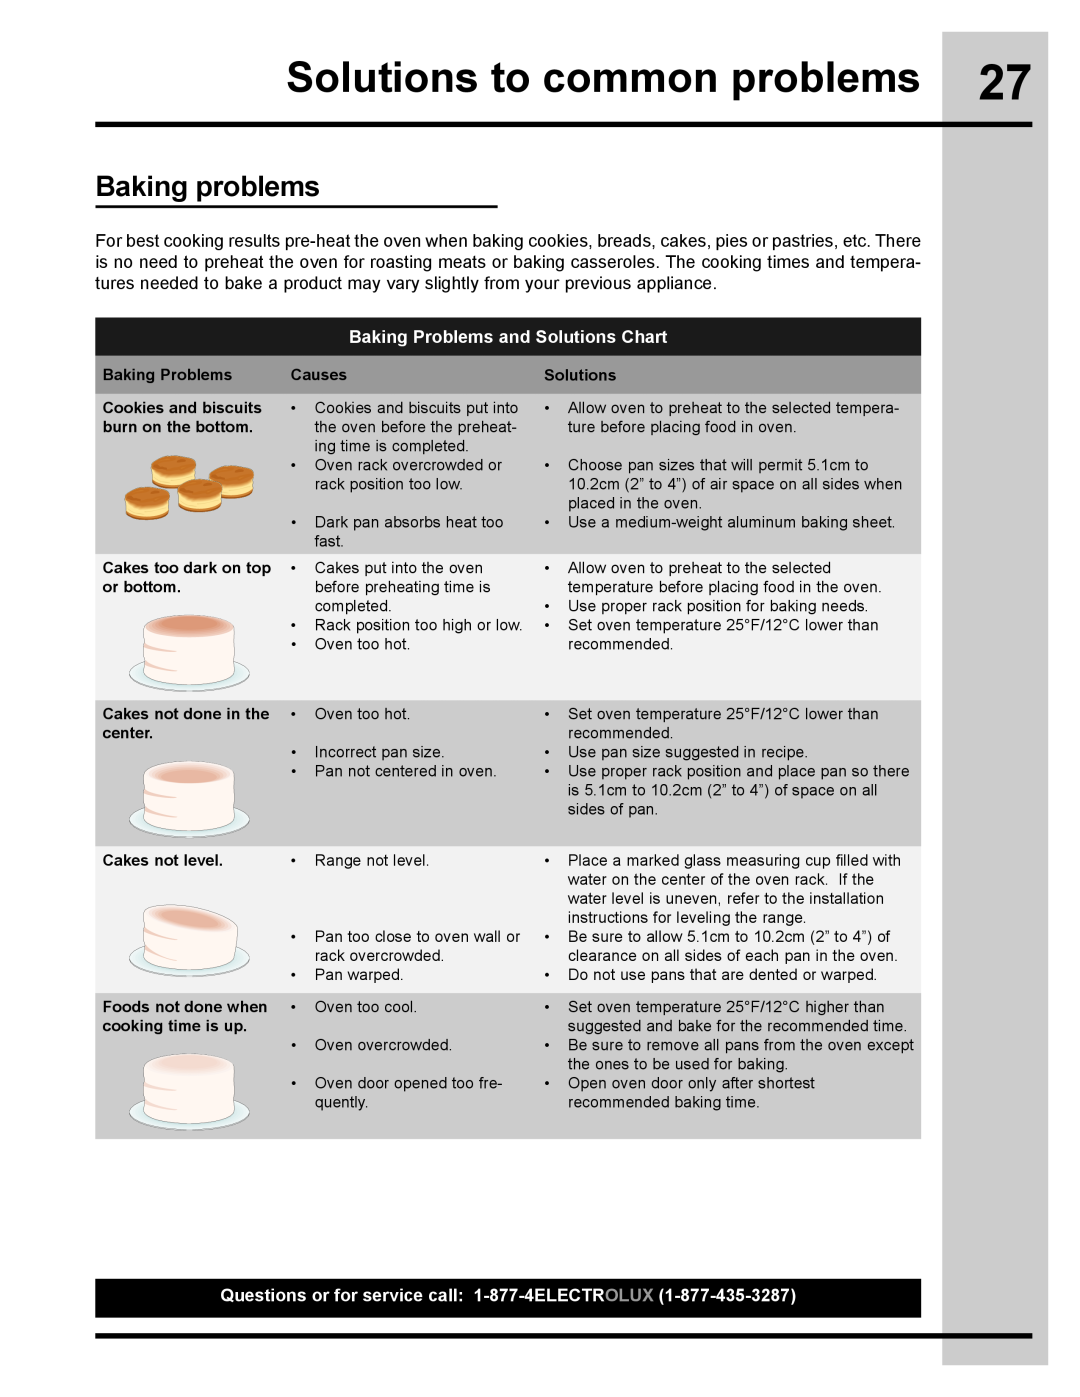 Electrolux 318205134 manual Solutions to common problems, Baking problems, Baking Problems and Solutions Chart 